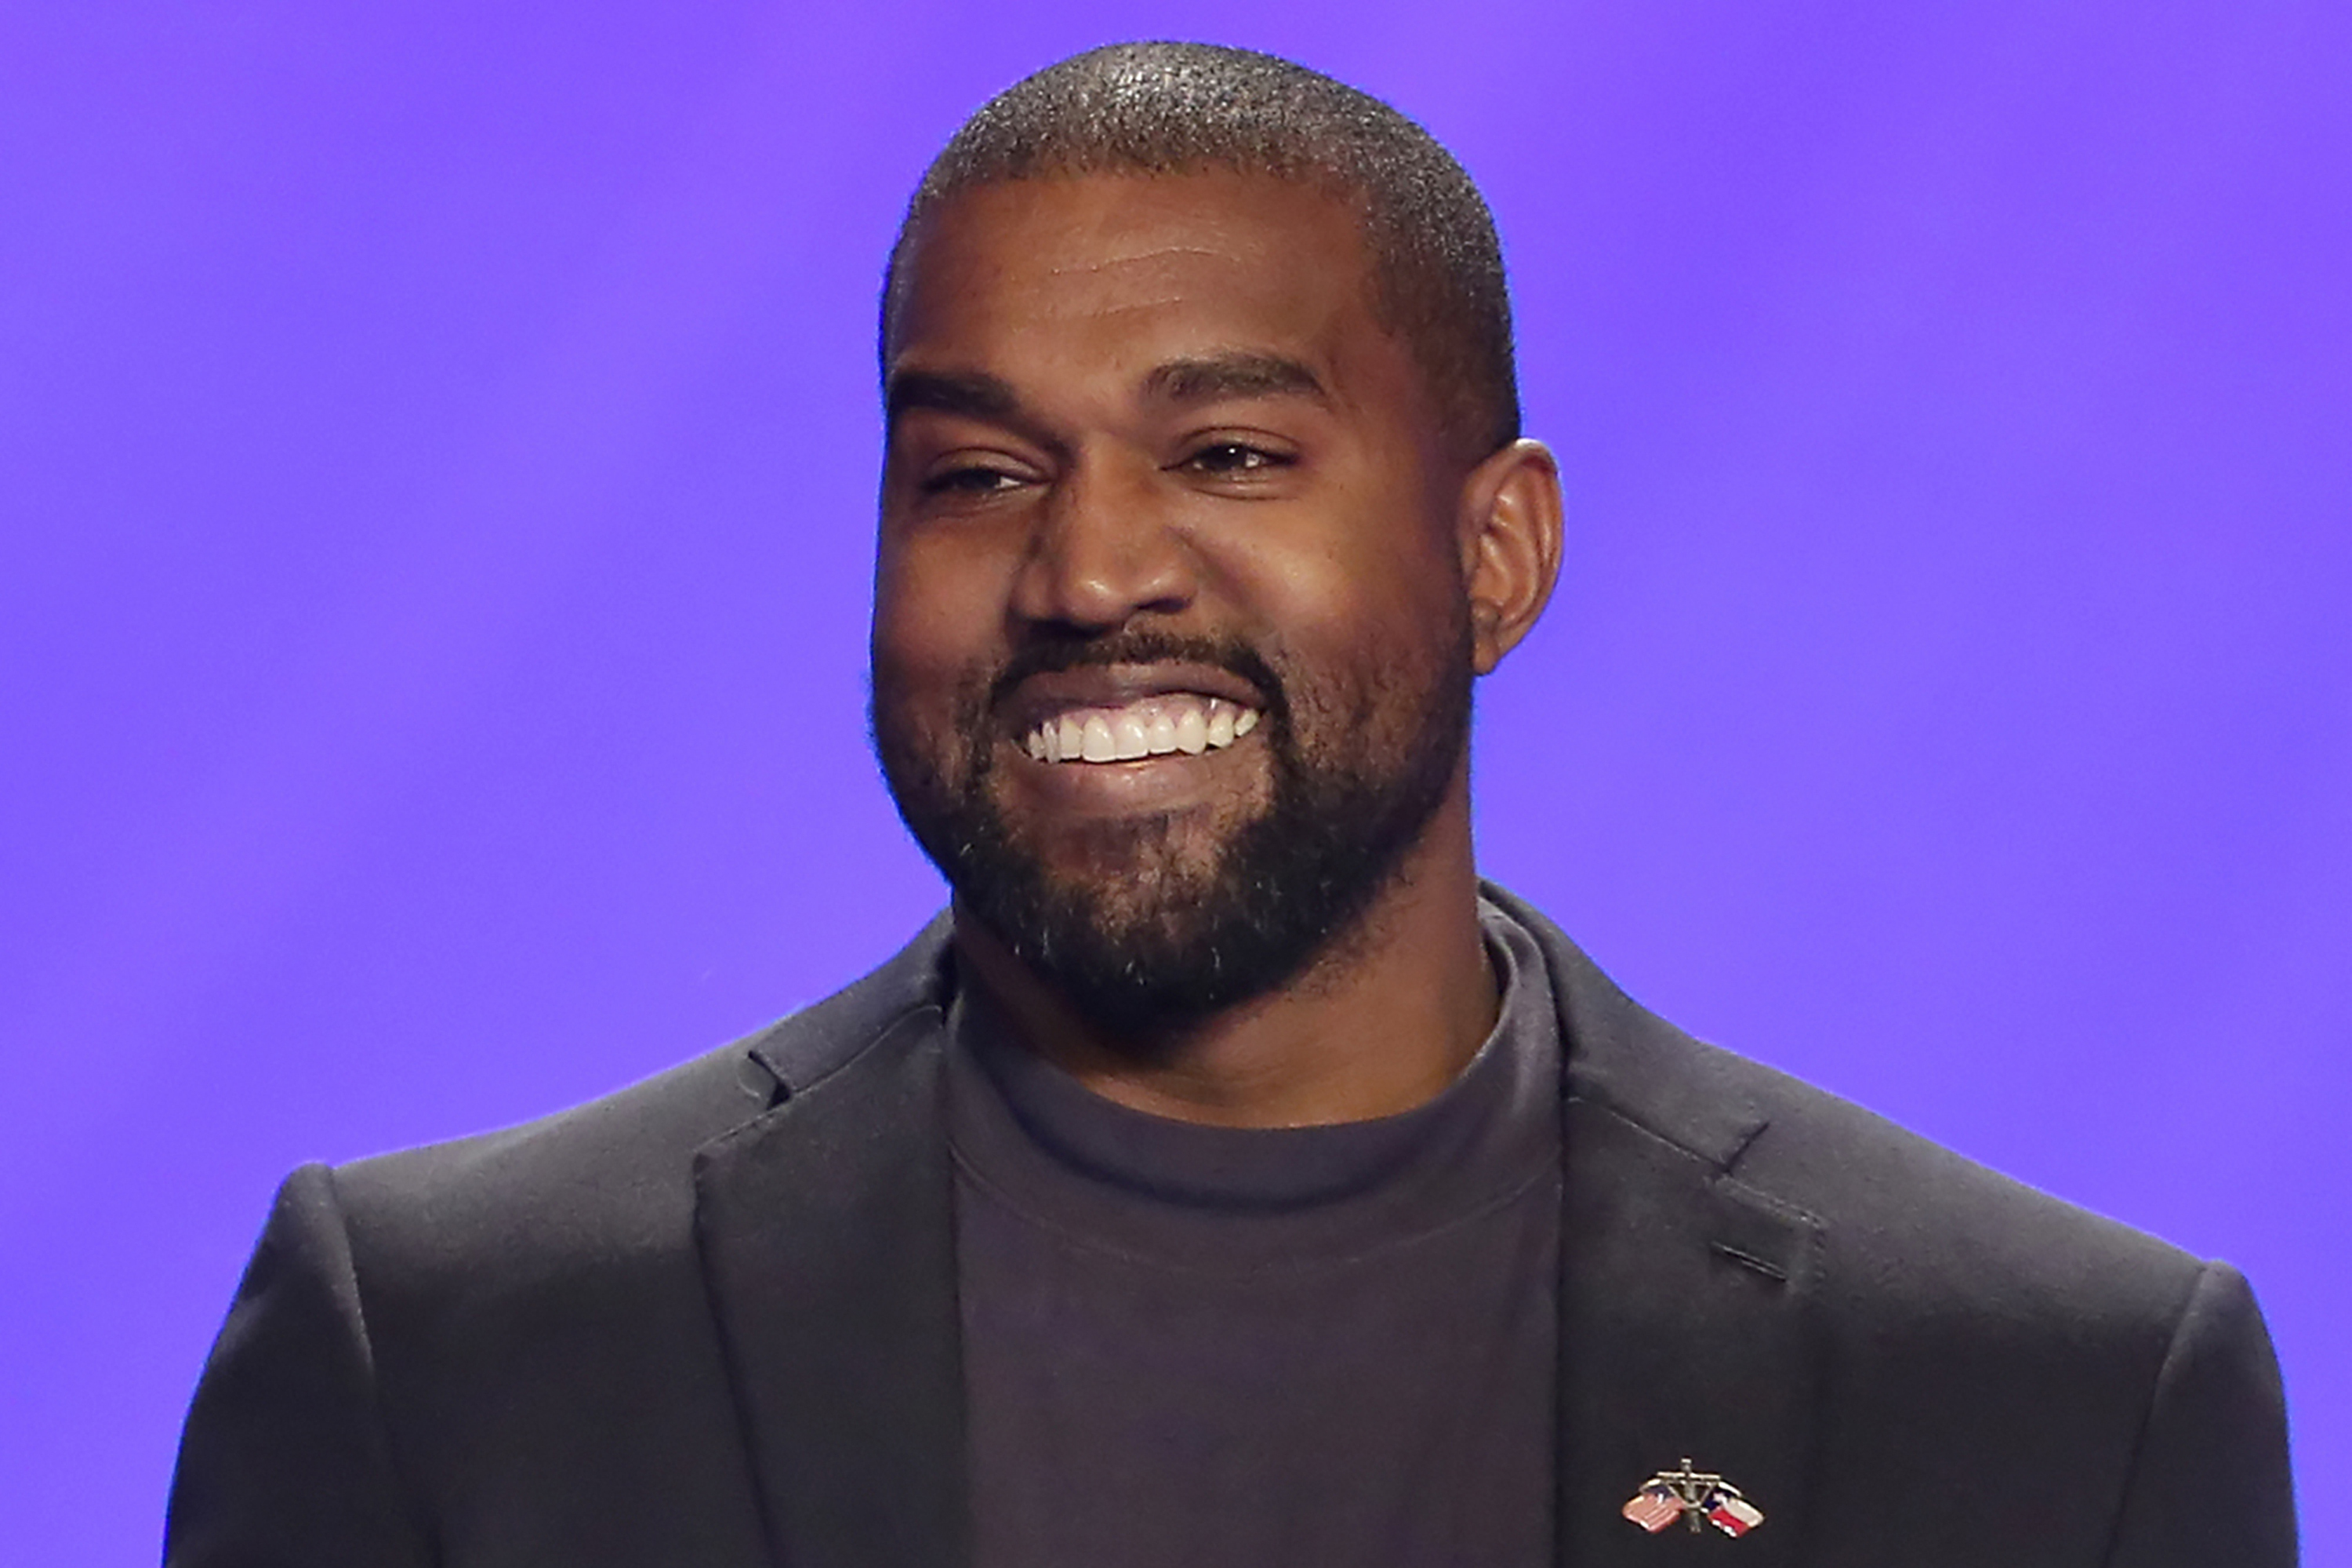 Kanye's Net Worth Reportedly Jumps to $6.6 Billion